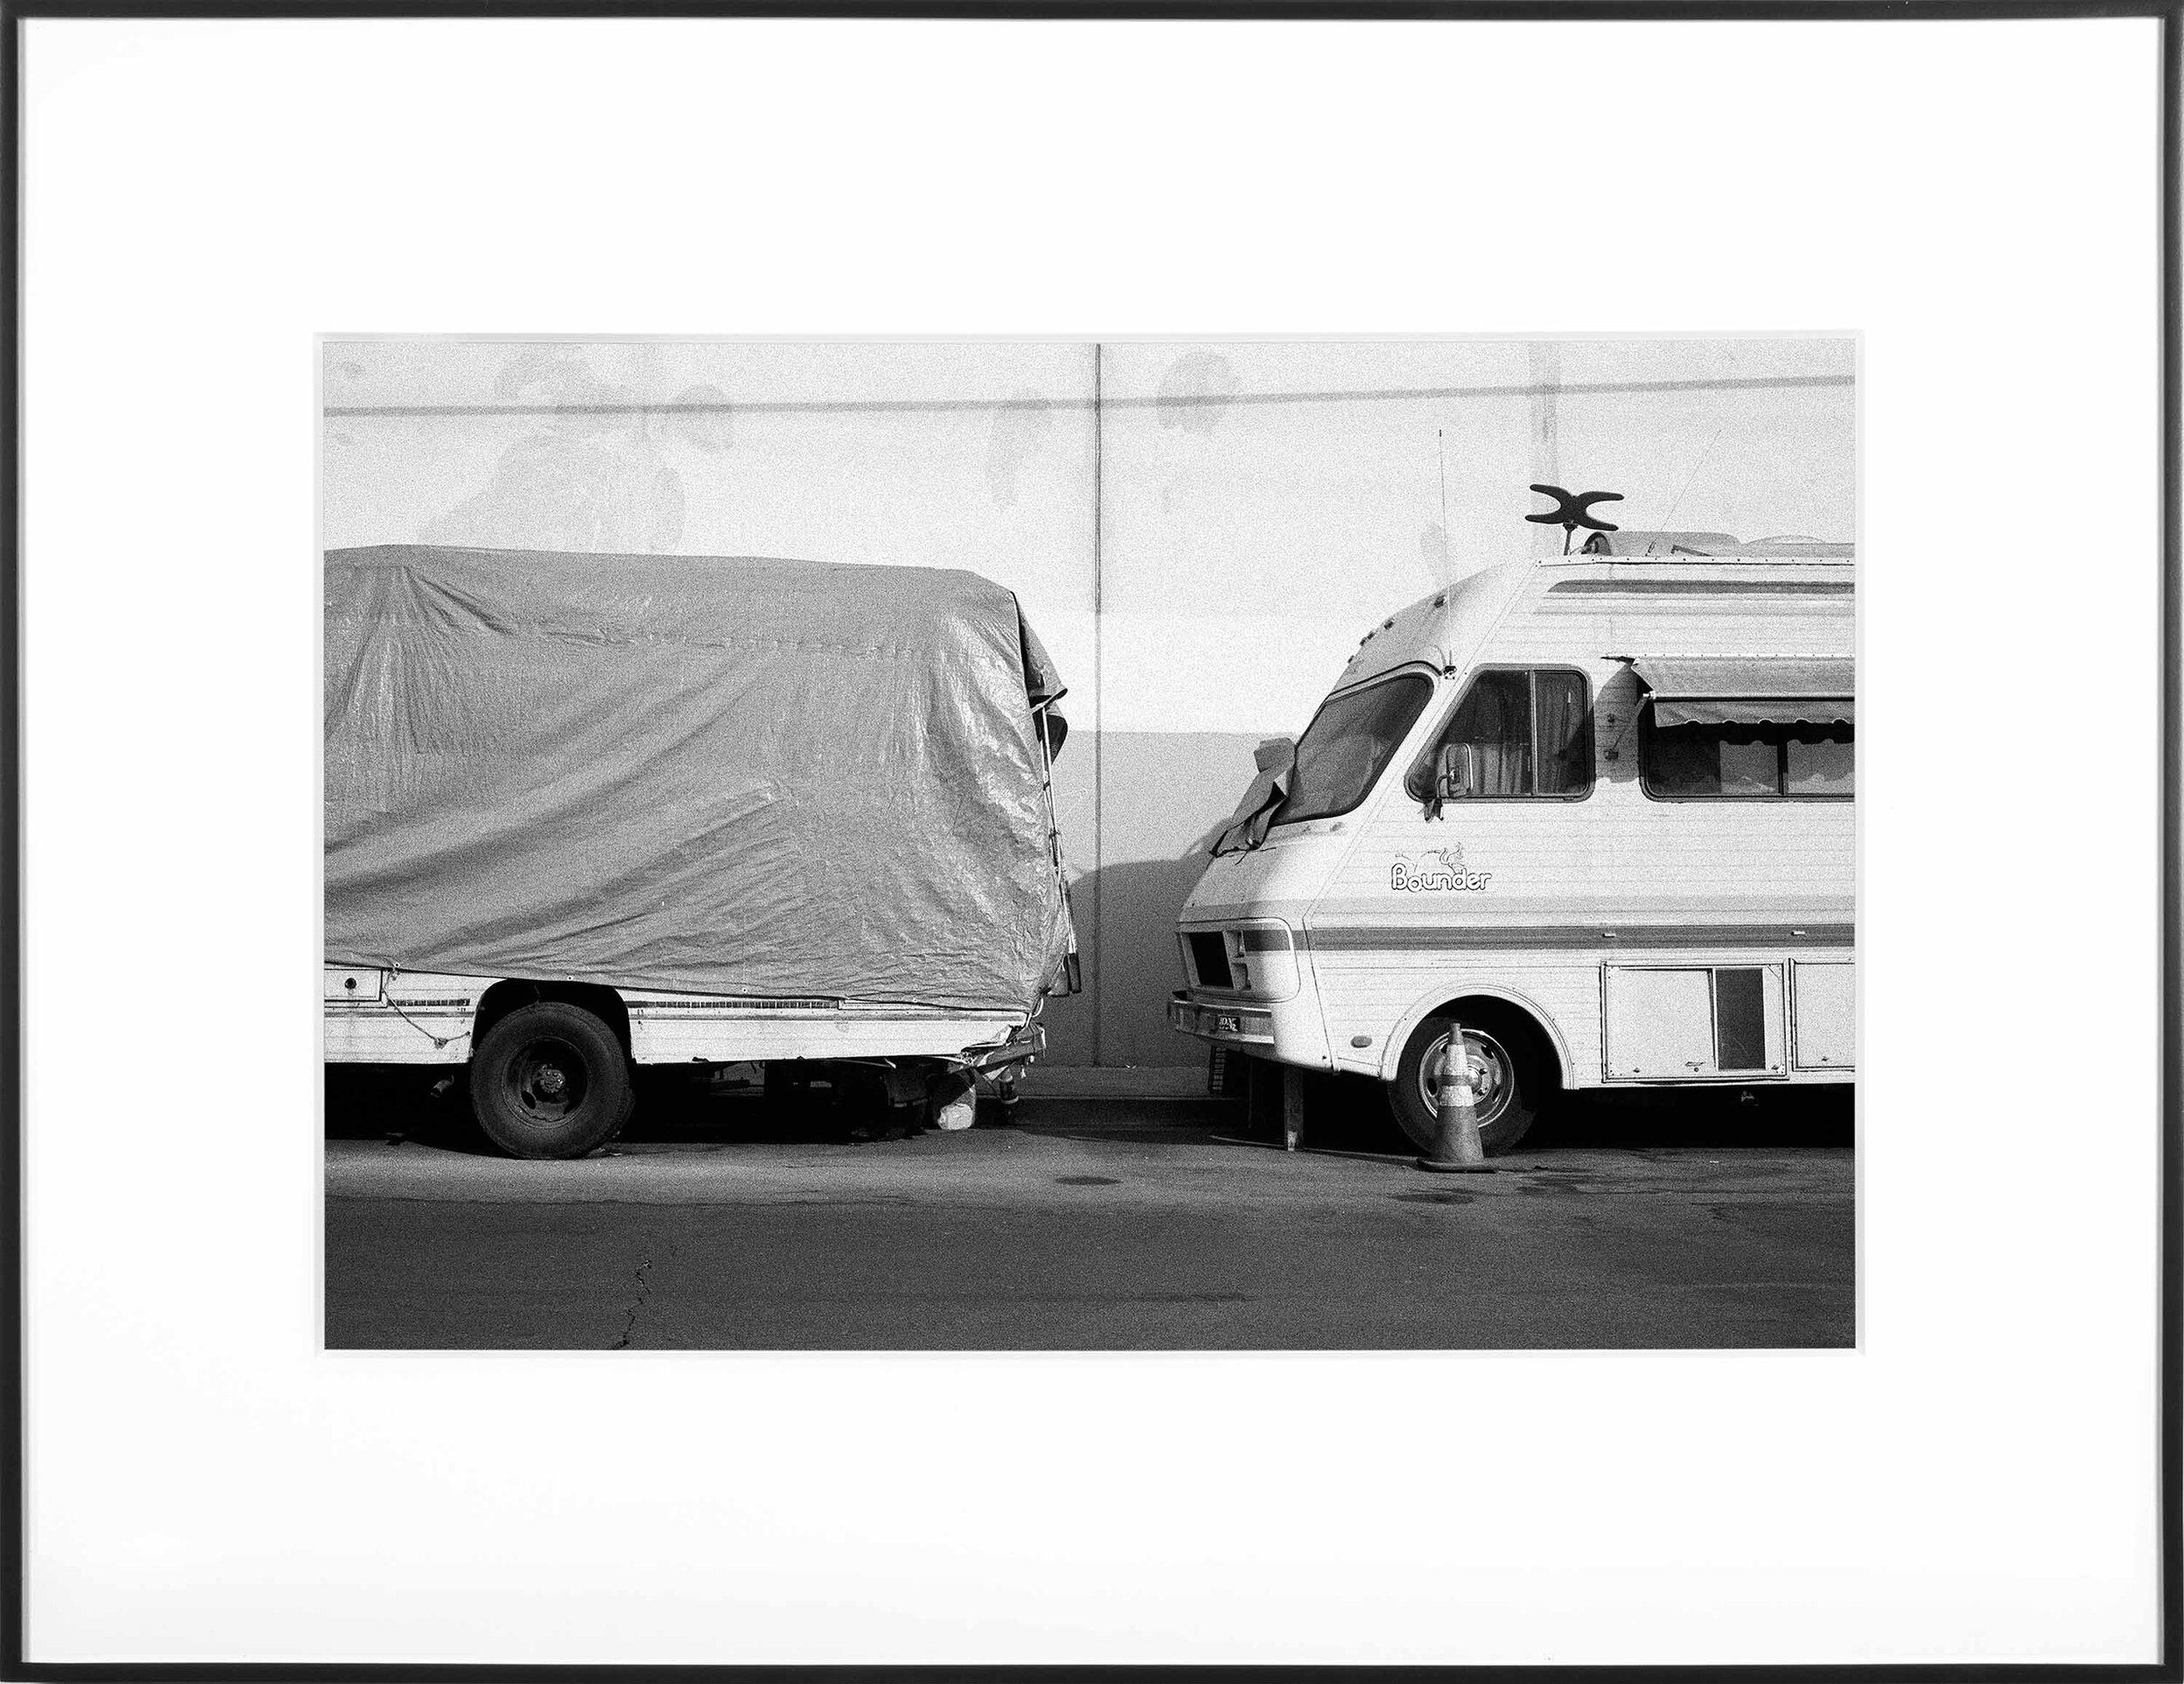   (Temporary) Homes for America: 3300 block to 4400 block, Union Pacific Avenue, between South Grande Vista Avenue and South Marianna Avenue, Los Angeles/Commerce, California, December 2020   2021  black and white fiber print 11 x 15 inches 